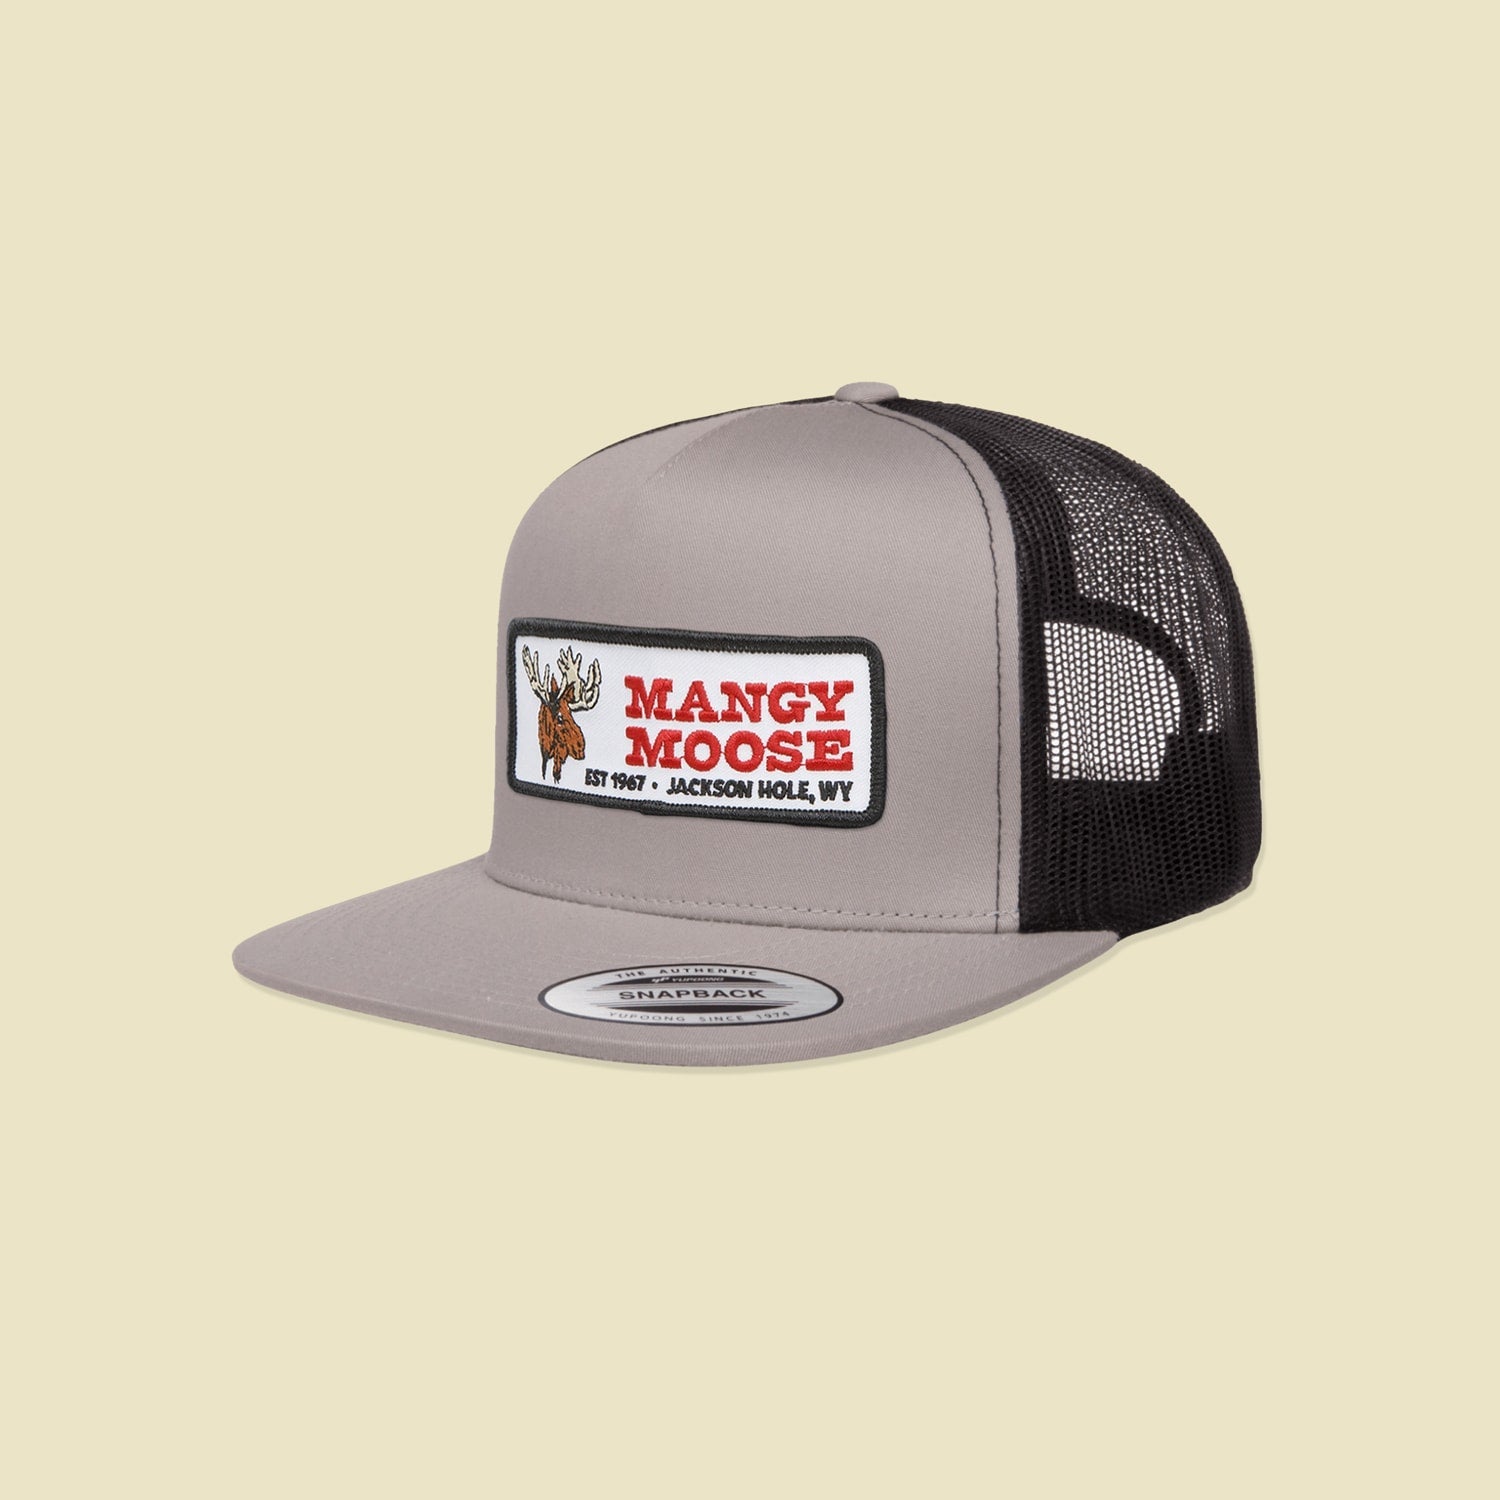 Manny Classic Mesh Trucker - The Mangy Moose